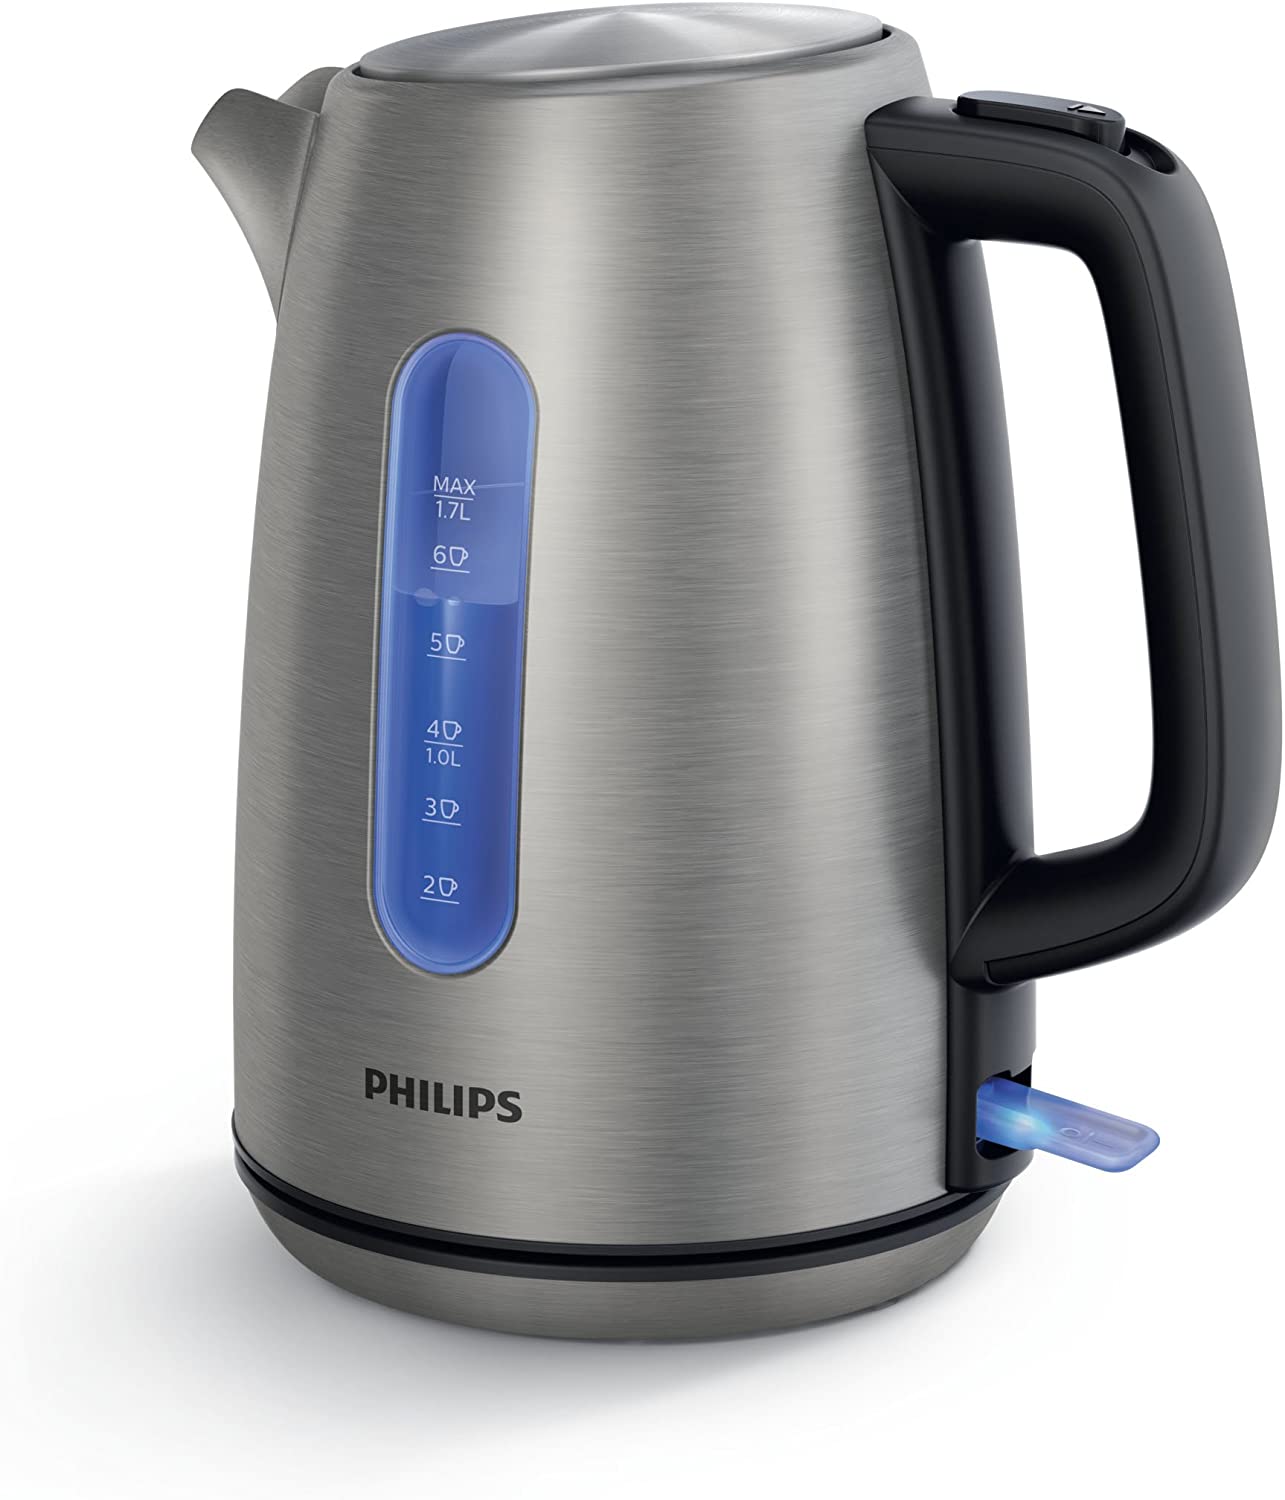 Philips HD9357/10 Kettle, 1.7 L, 2200 W, Stainless Steel